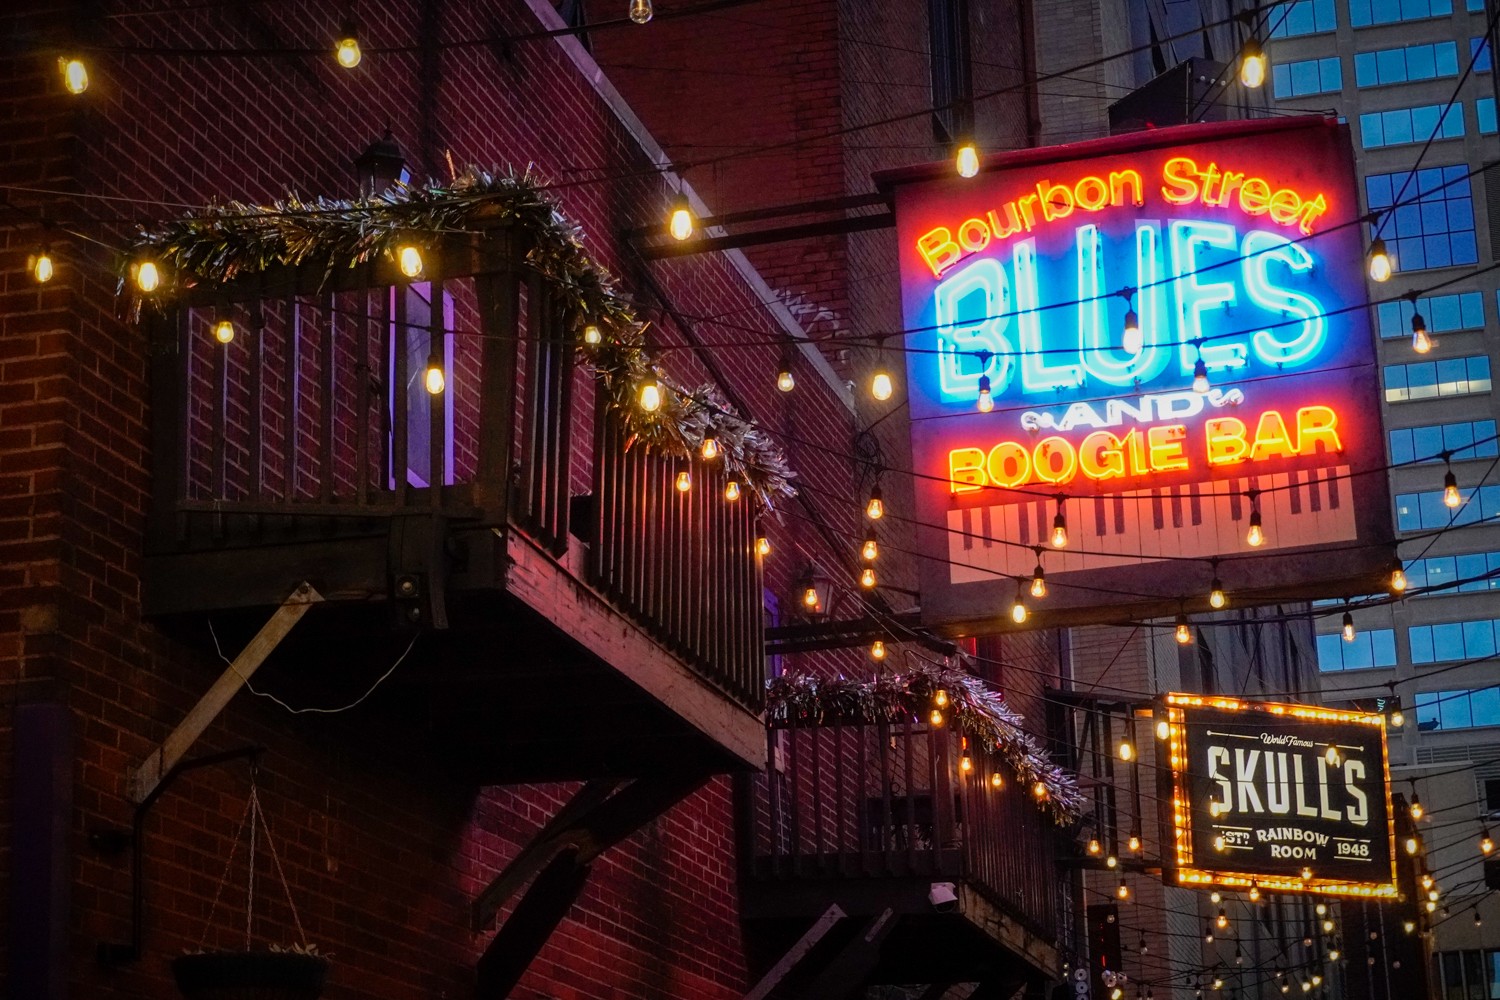 4 Legendary Blues Musicians You Didn’t Know Performed at Bourbon Street Blues & Boogie Bar